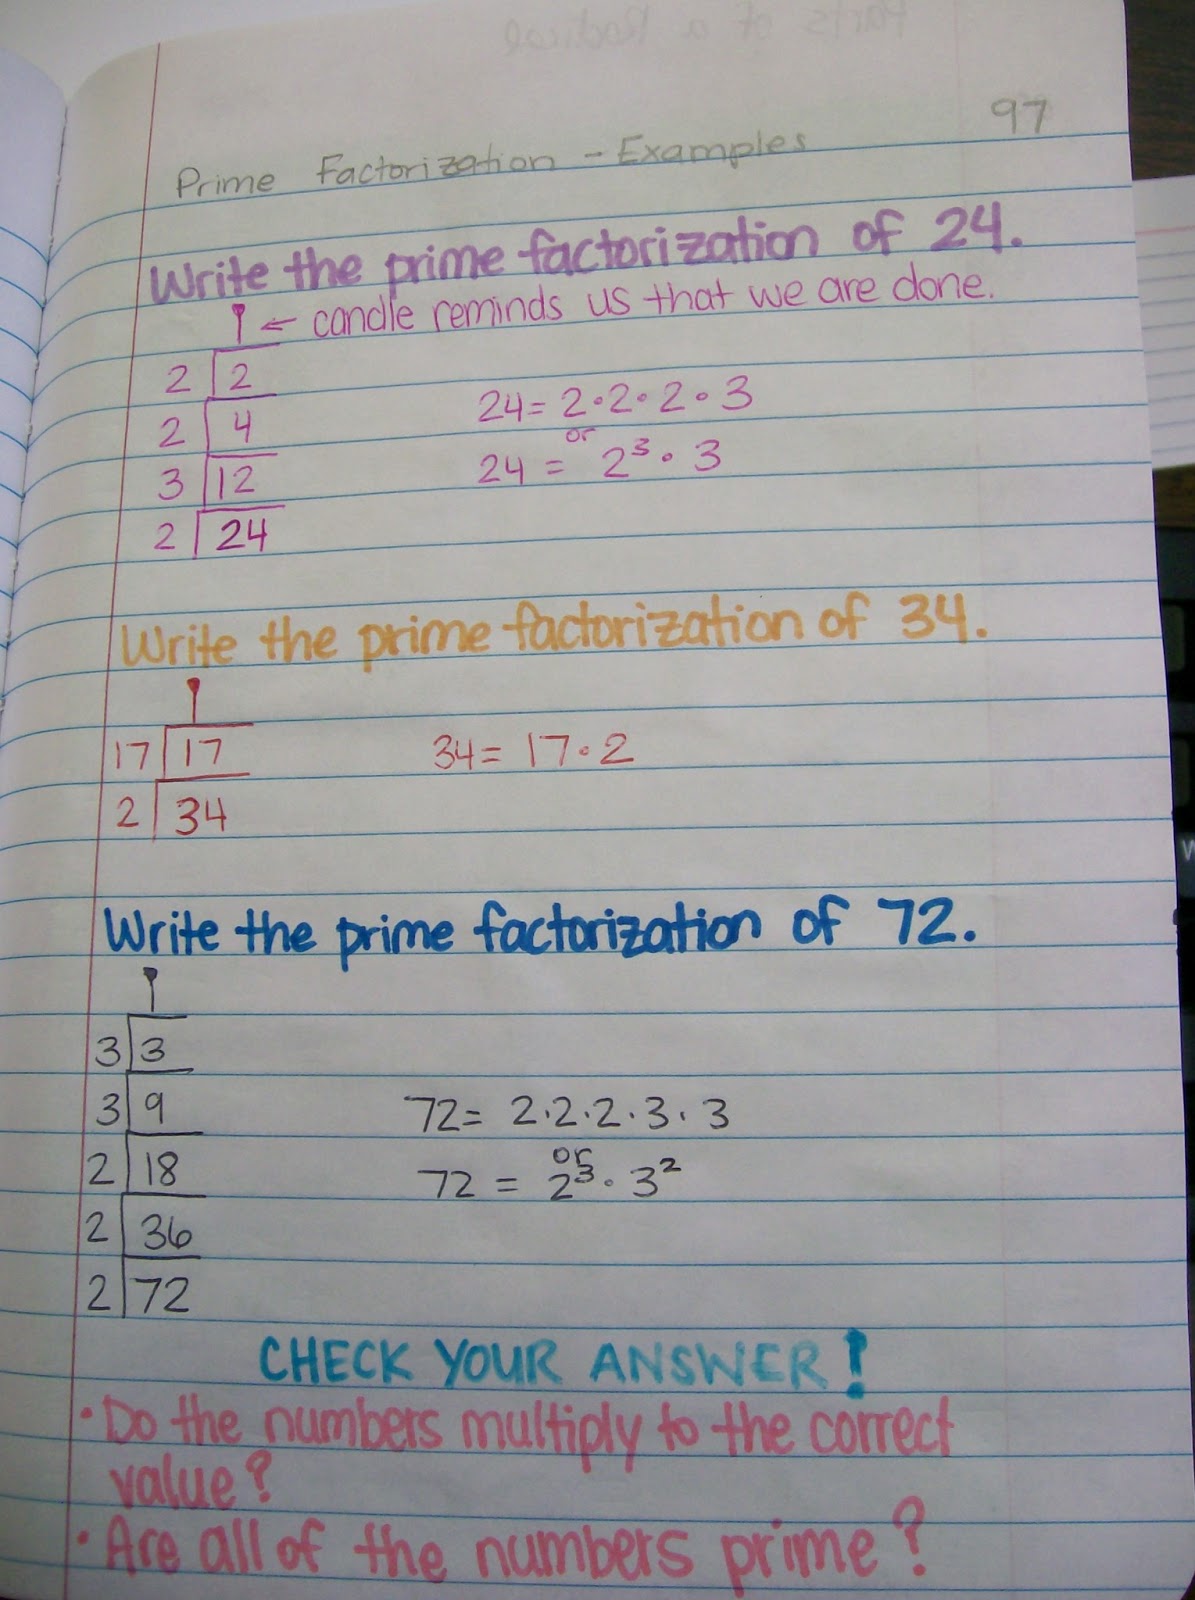 Examples of Prime Factorization Using the Birthday Cake Method.